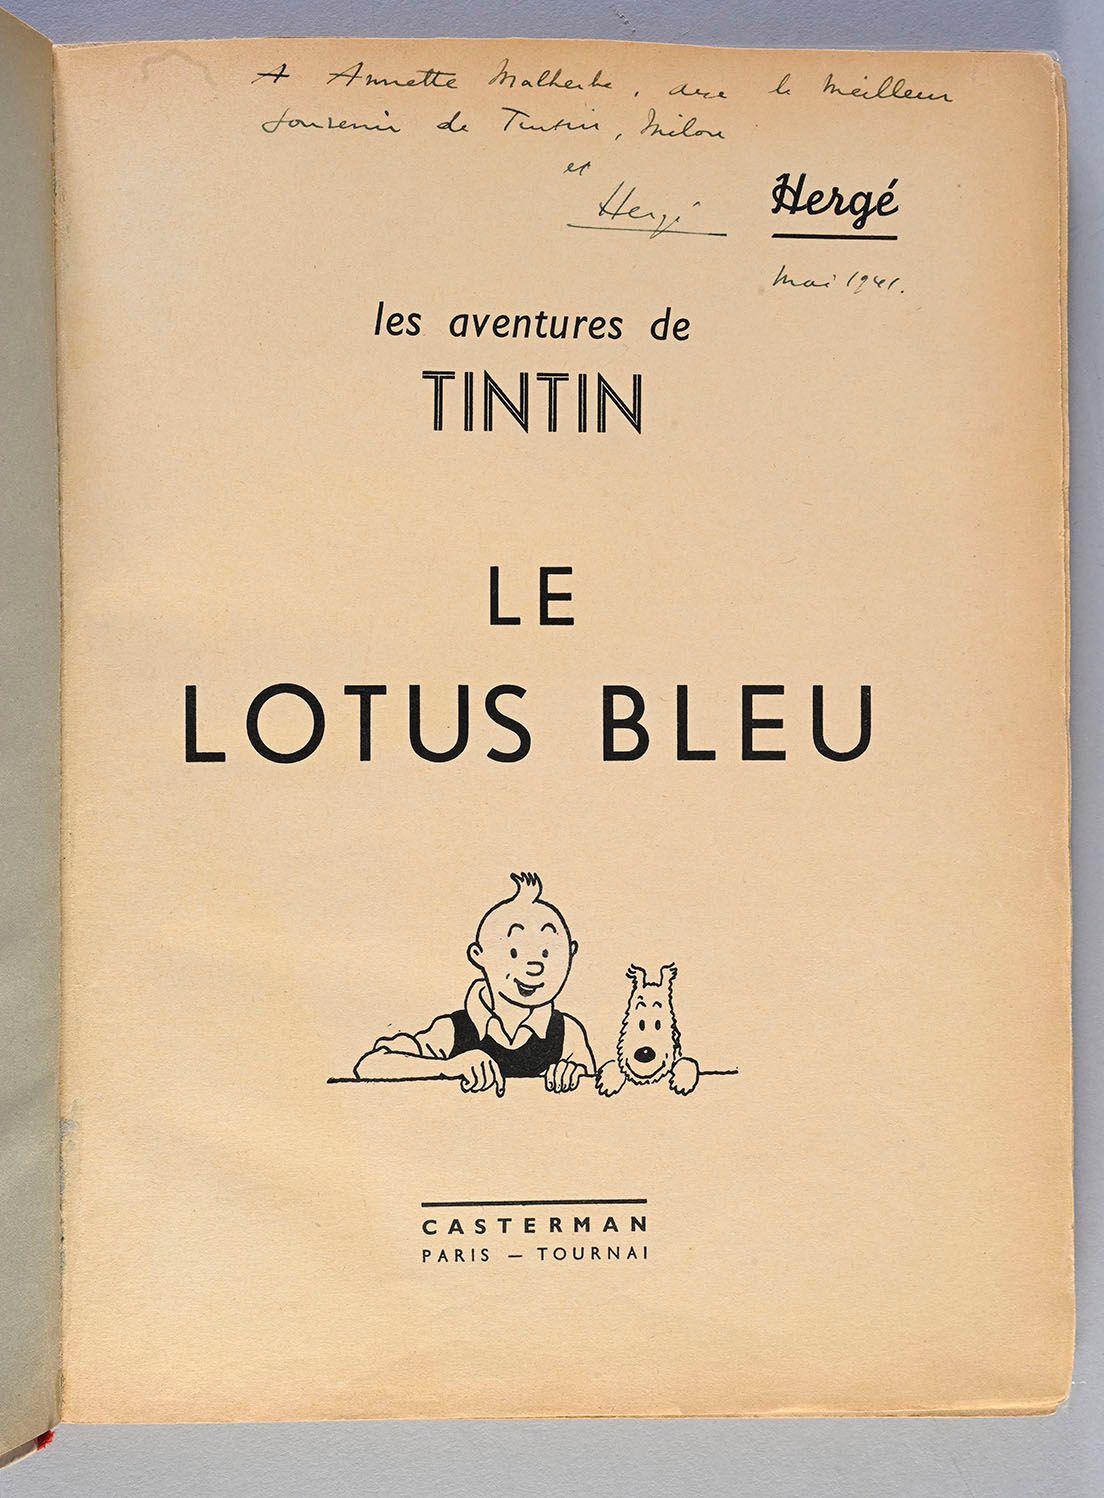 HERGÉ TINTIN 05. THE BLUE LOTUS DEDICATION. EDITION A9 - 1939. 4th plate Small p&hellip;